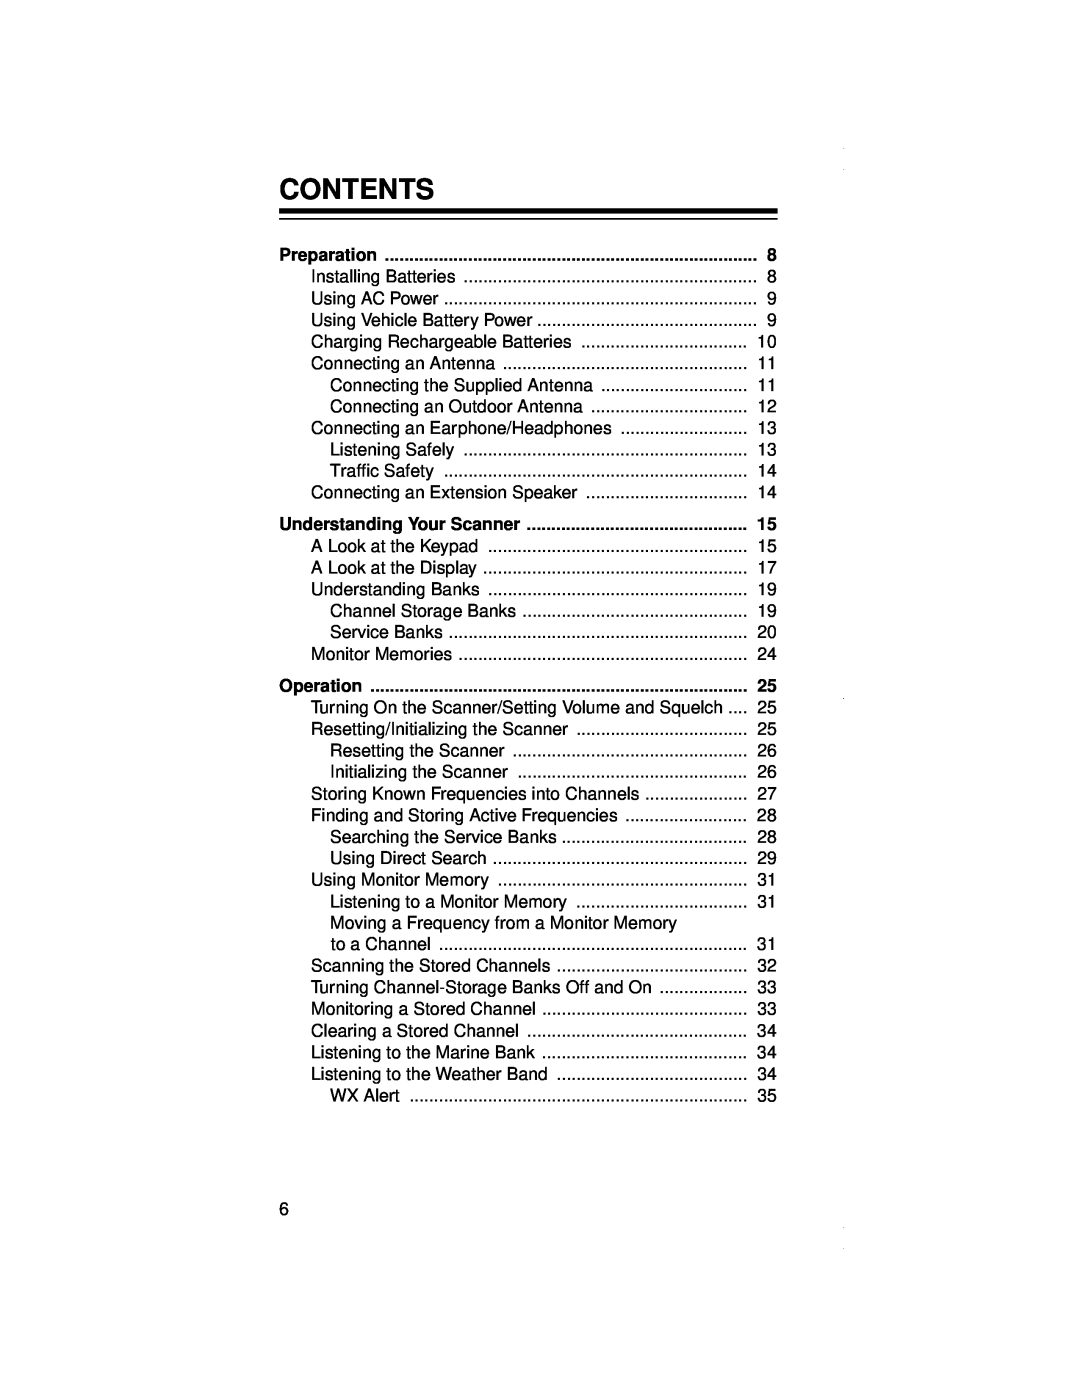 Radio Shack PRO-79 owner manual Contents 